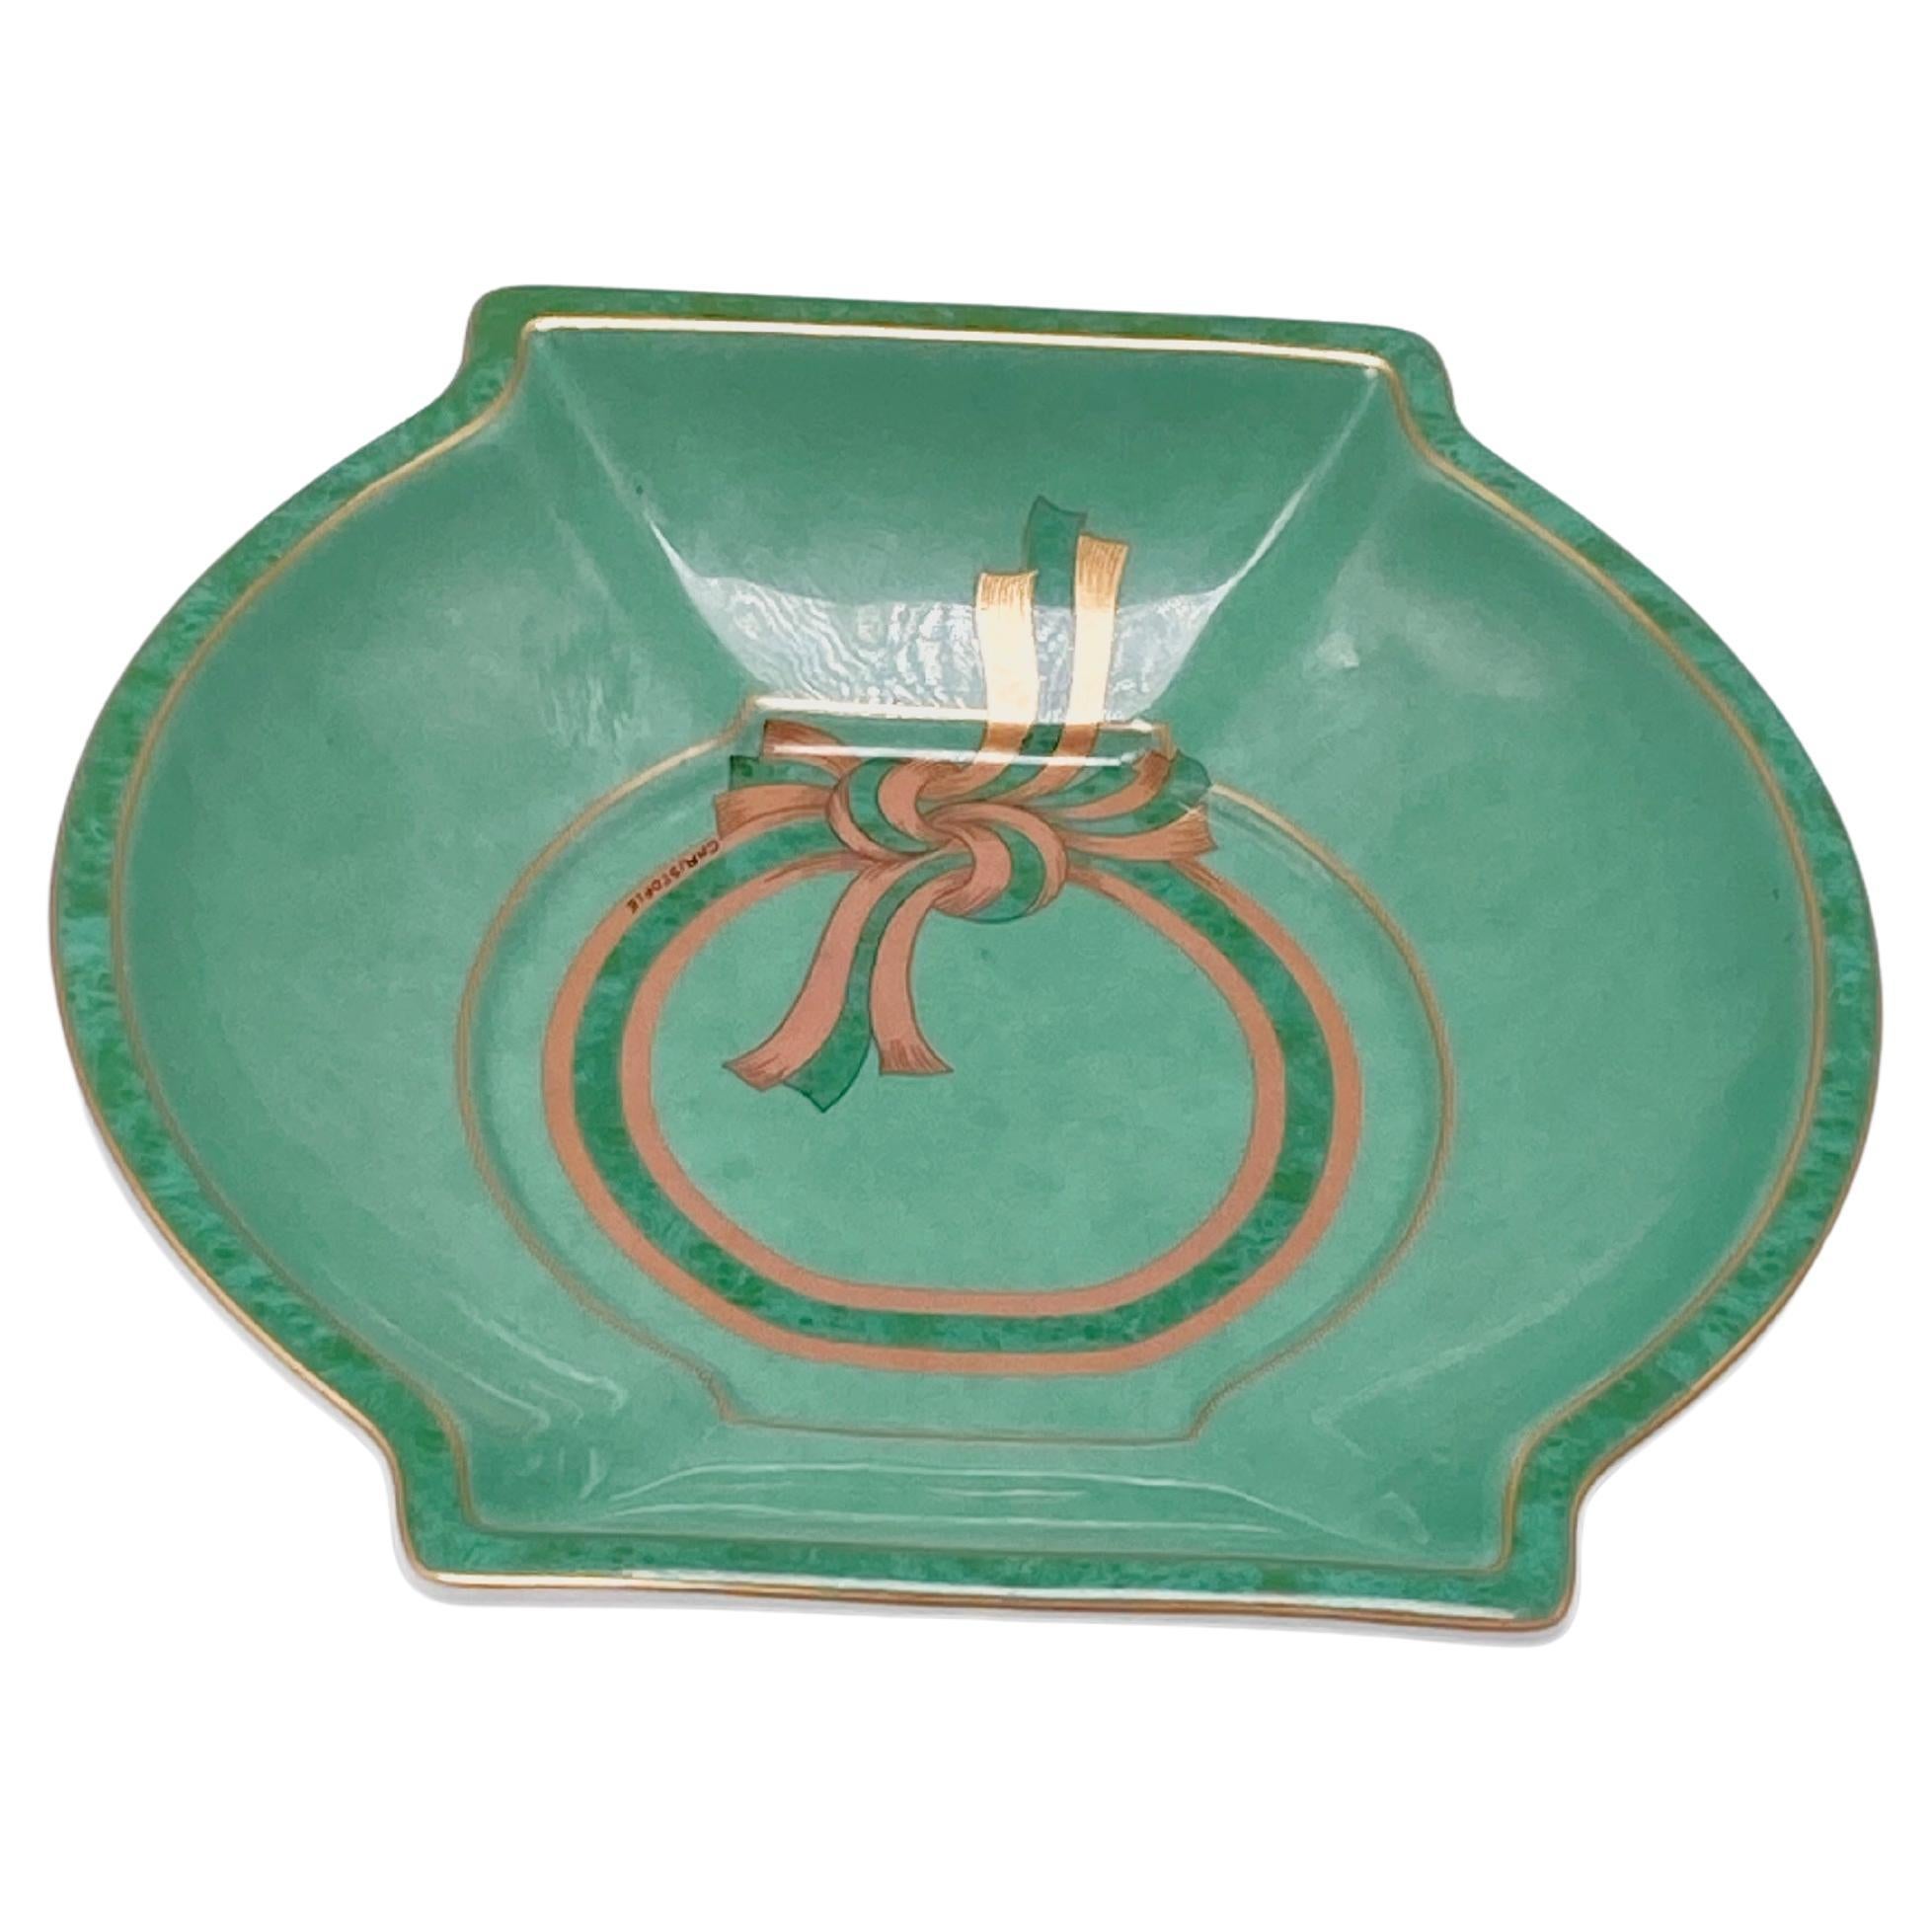  Rare Christofle Ashtray, in Porcelain, green hand painted, France 1970, signed 